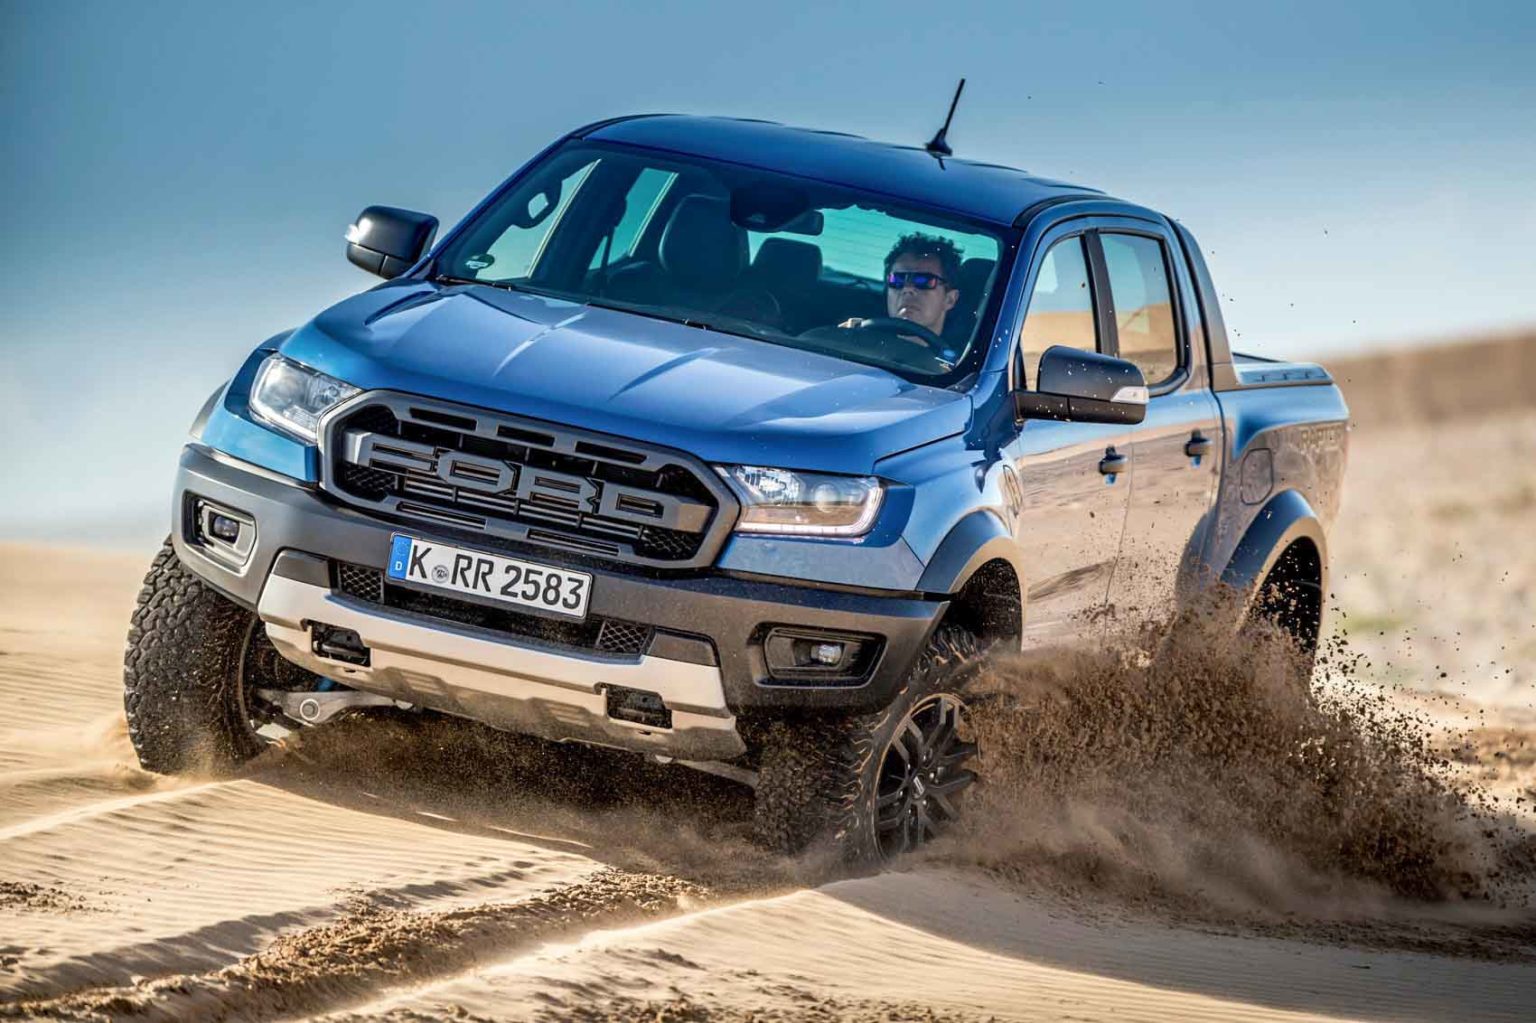 Ford Ranger Raptor India Launch This Year - 5 Things To Know